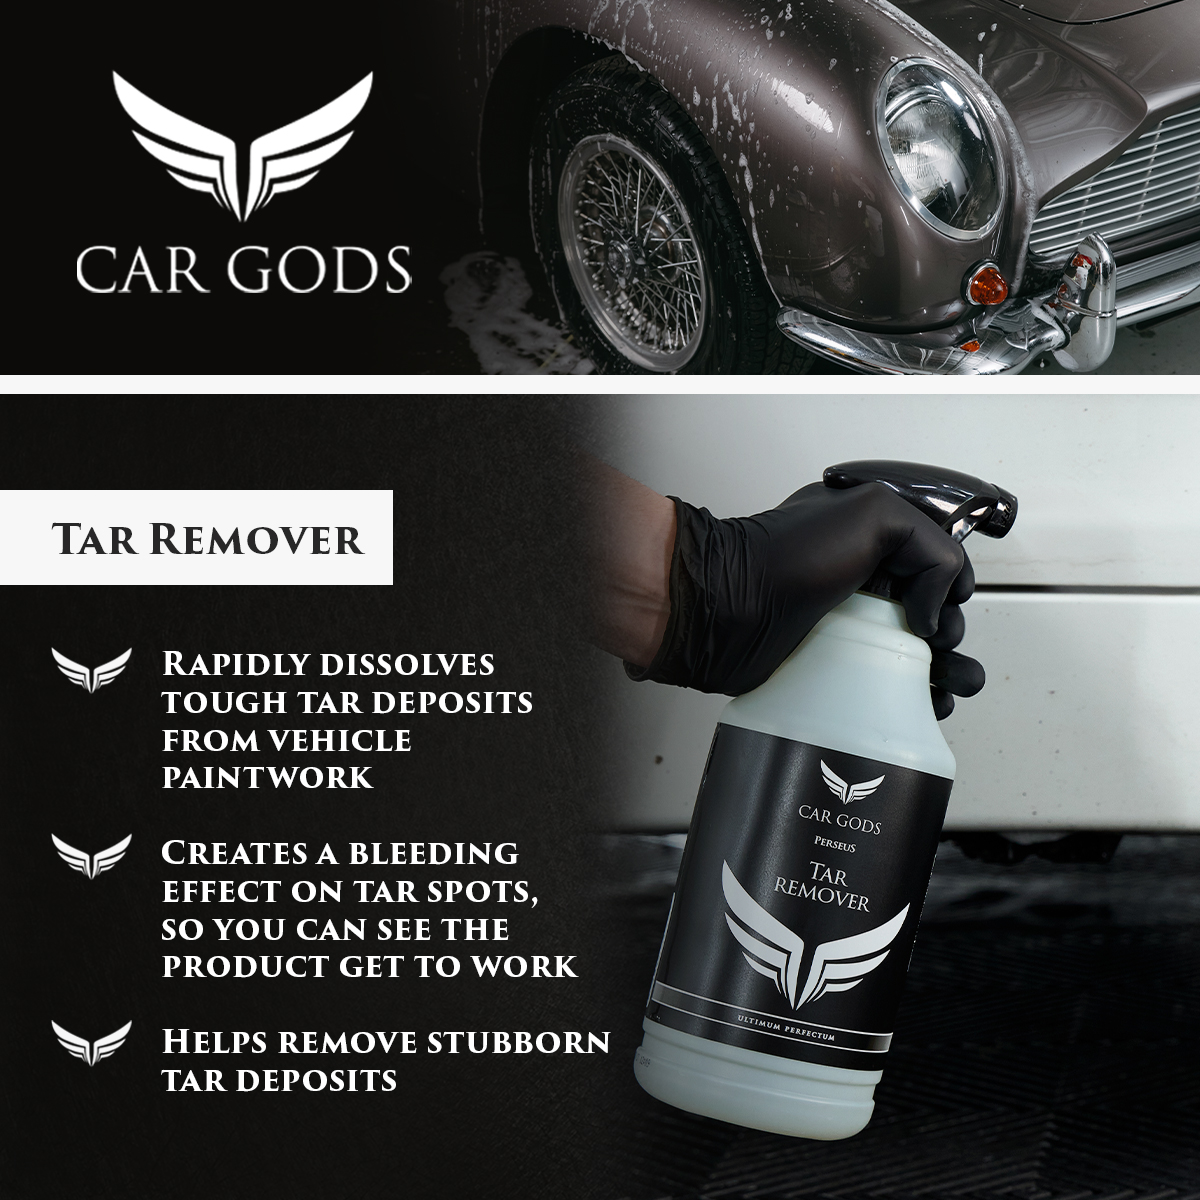 Car Gods Tar Remover rapidly dissolves tough tar deposits from vehicle paintwork, creates a bleeding effect on tar spots so you can see the product get to work, the ready-to-use formulation gets to work quickly and helps remove stubborn tar deposits.